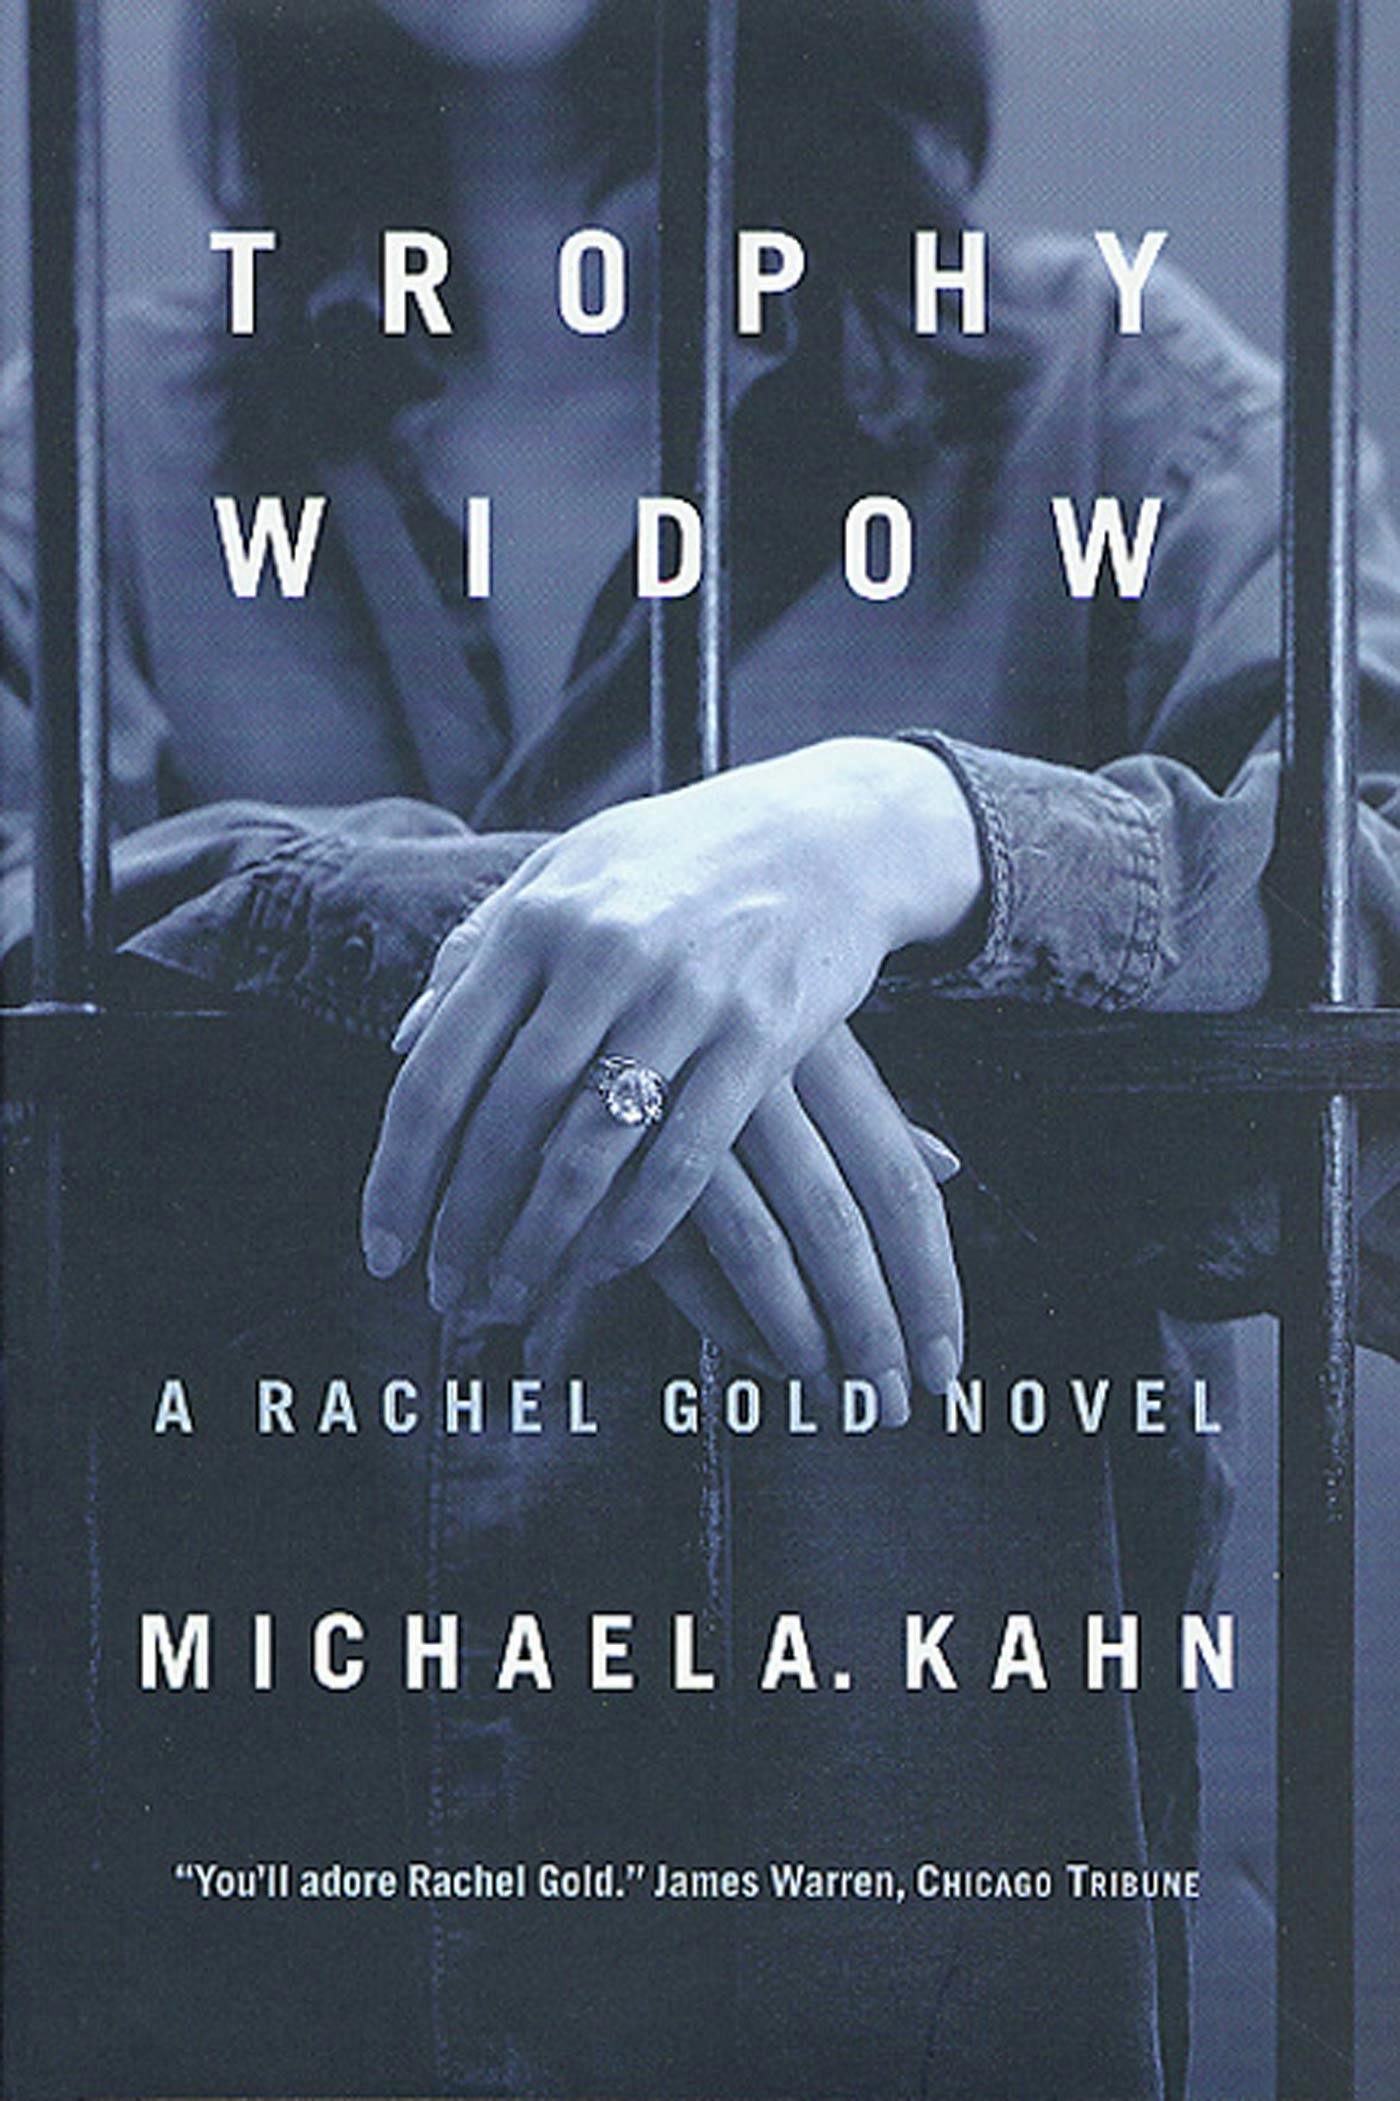 Cover for the book titled as: Trophy Widow